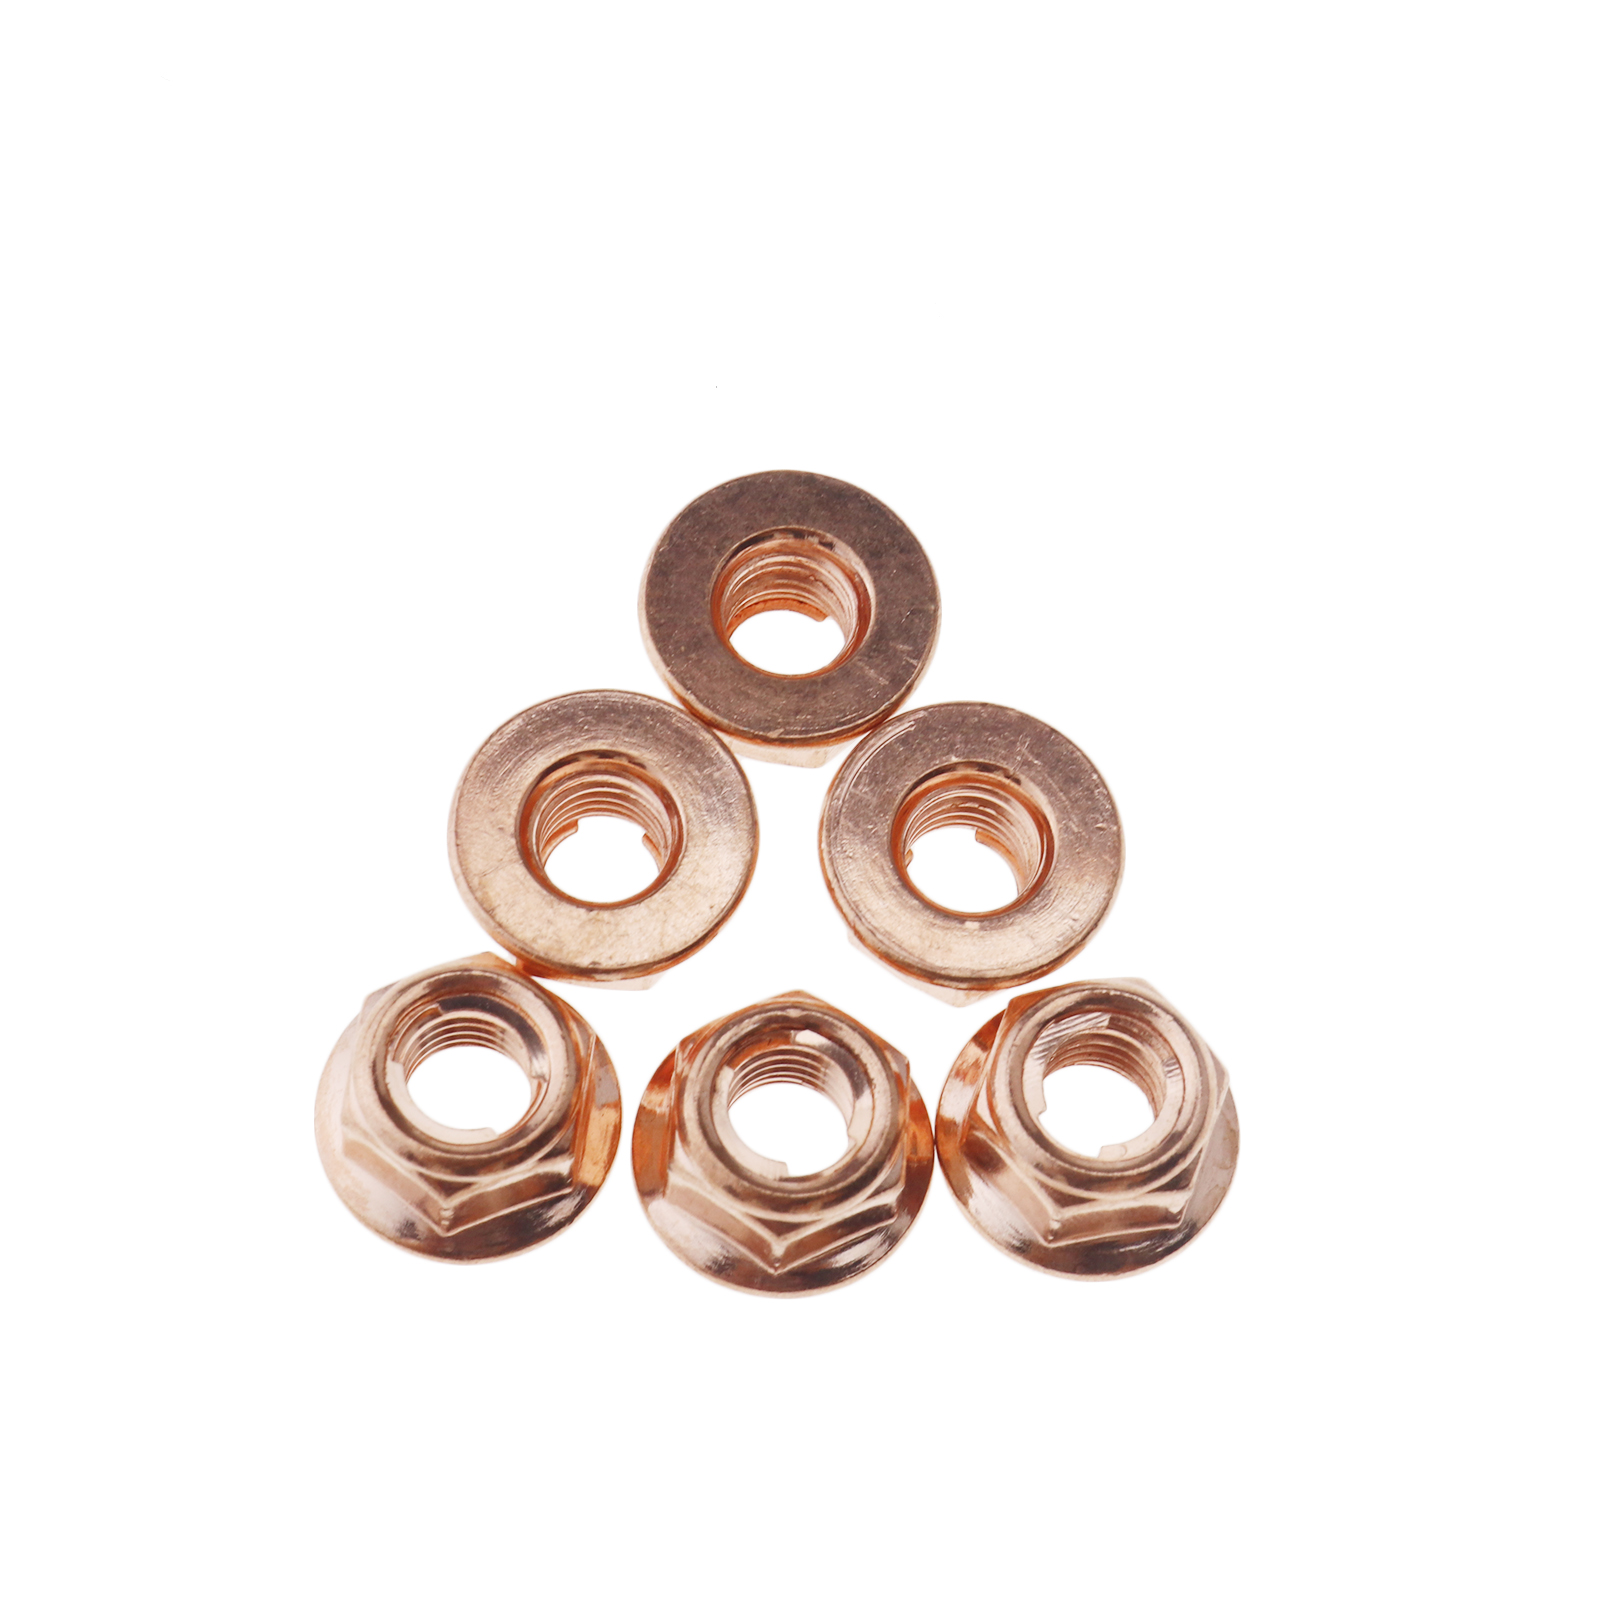 M8 Hex Copper Exhaust Manifold Pipe Nuts Self Locking For BMW 3 Series